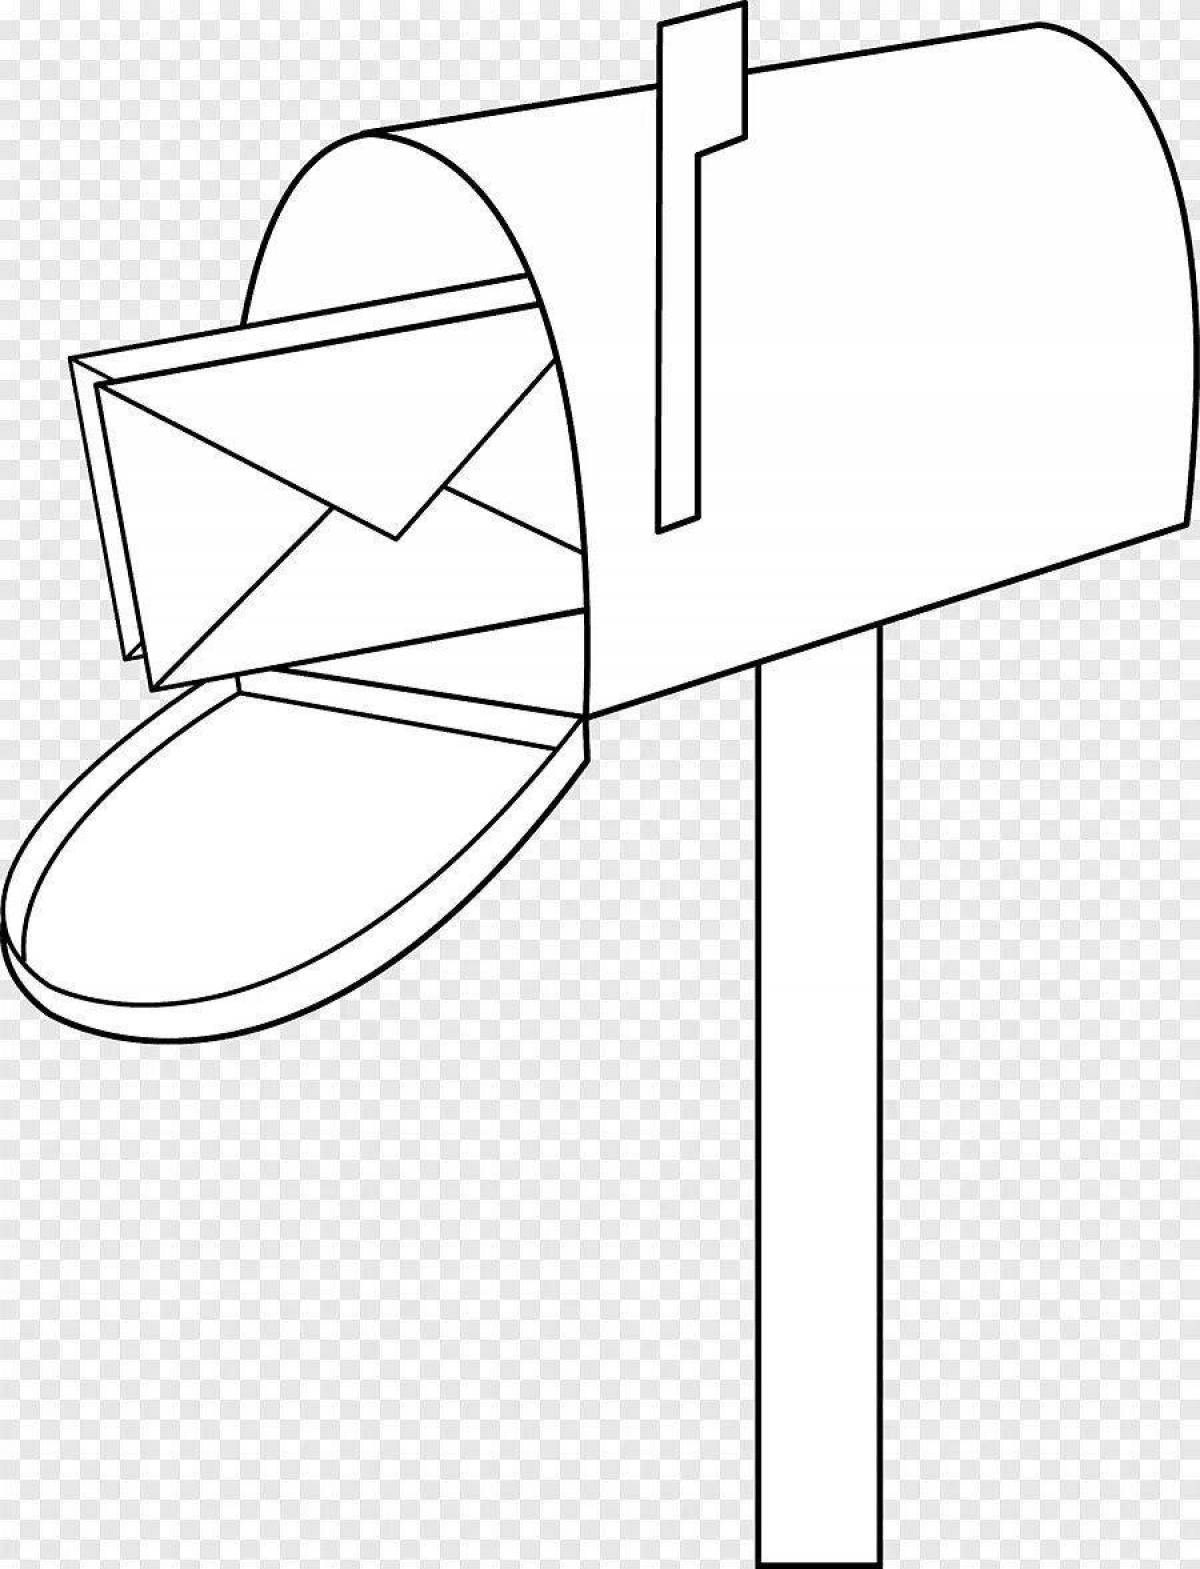 Glowing mailbox coloring page